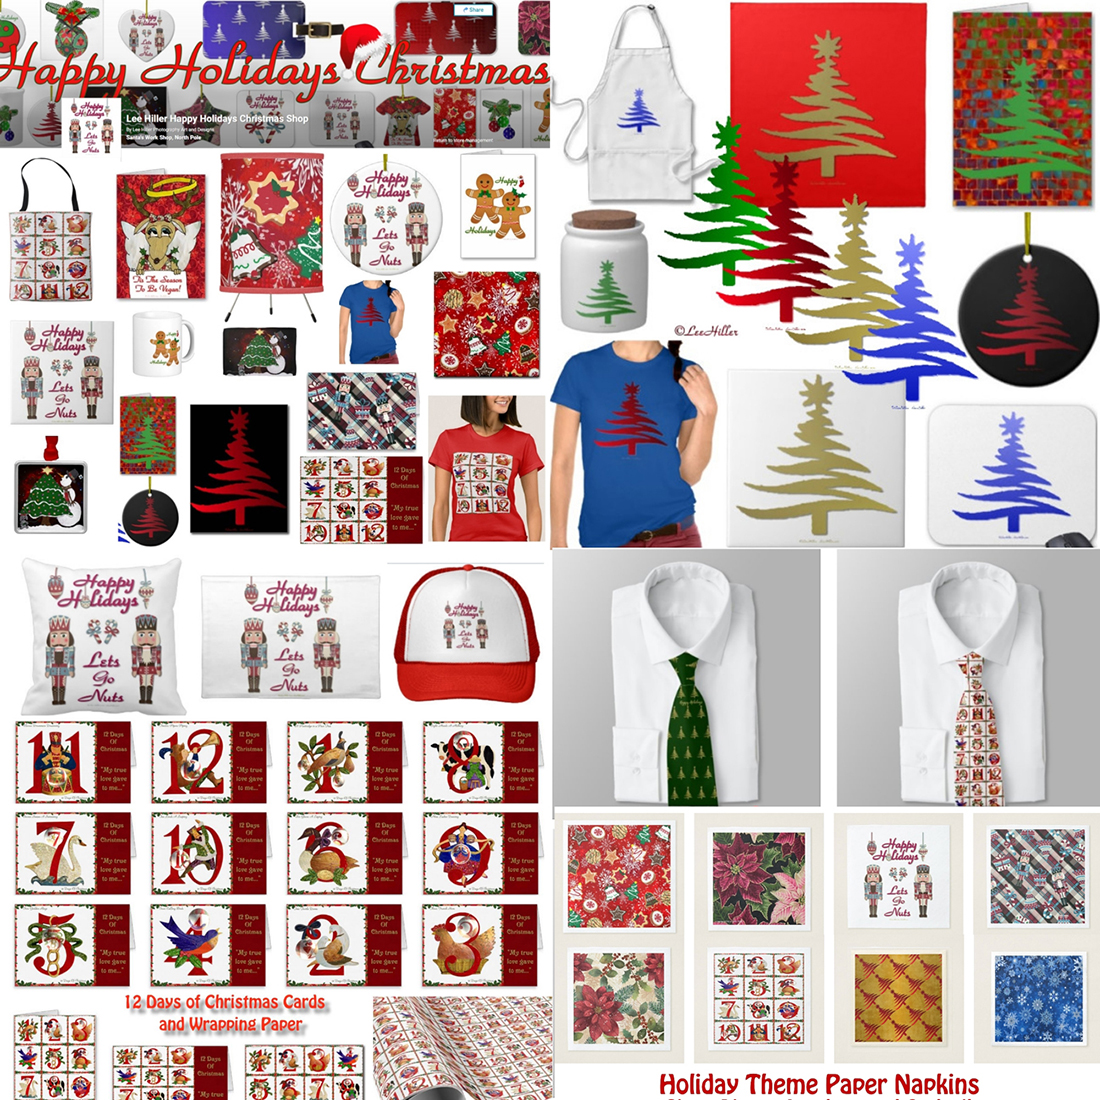 🌟🎄🎁🎄🎁🎄🌟
Yes, The #HappyHolidays Shop is Always Open!
#Christmas #12DaysOfChristmas #ChristmasTree #snowflake #Nutcracker #poinsettia #Gingerbread #holidaycheer #Christmas2023 #holidaydecor #gifts #giftideas #homedecor #scapbooking #crafting

bitly.com/ZHolidayShop